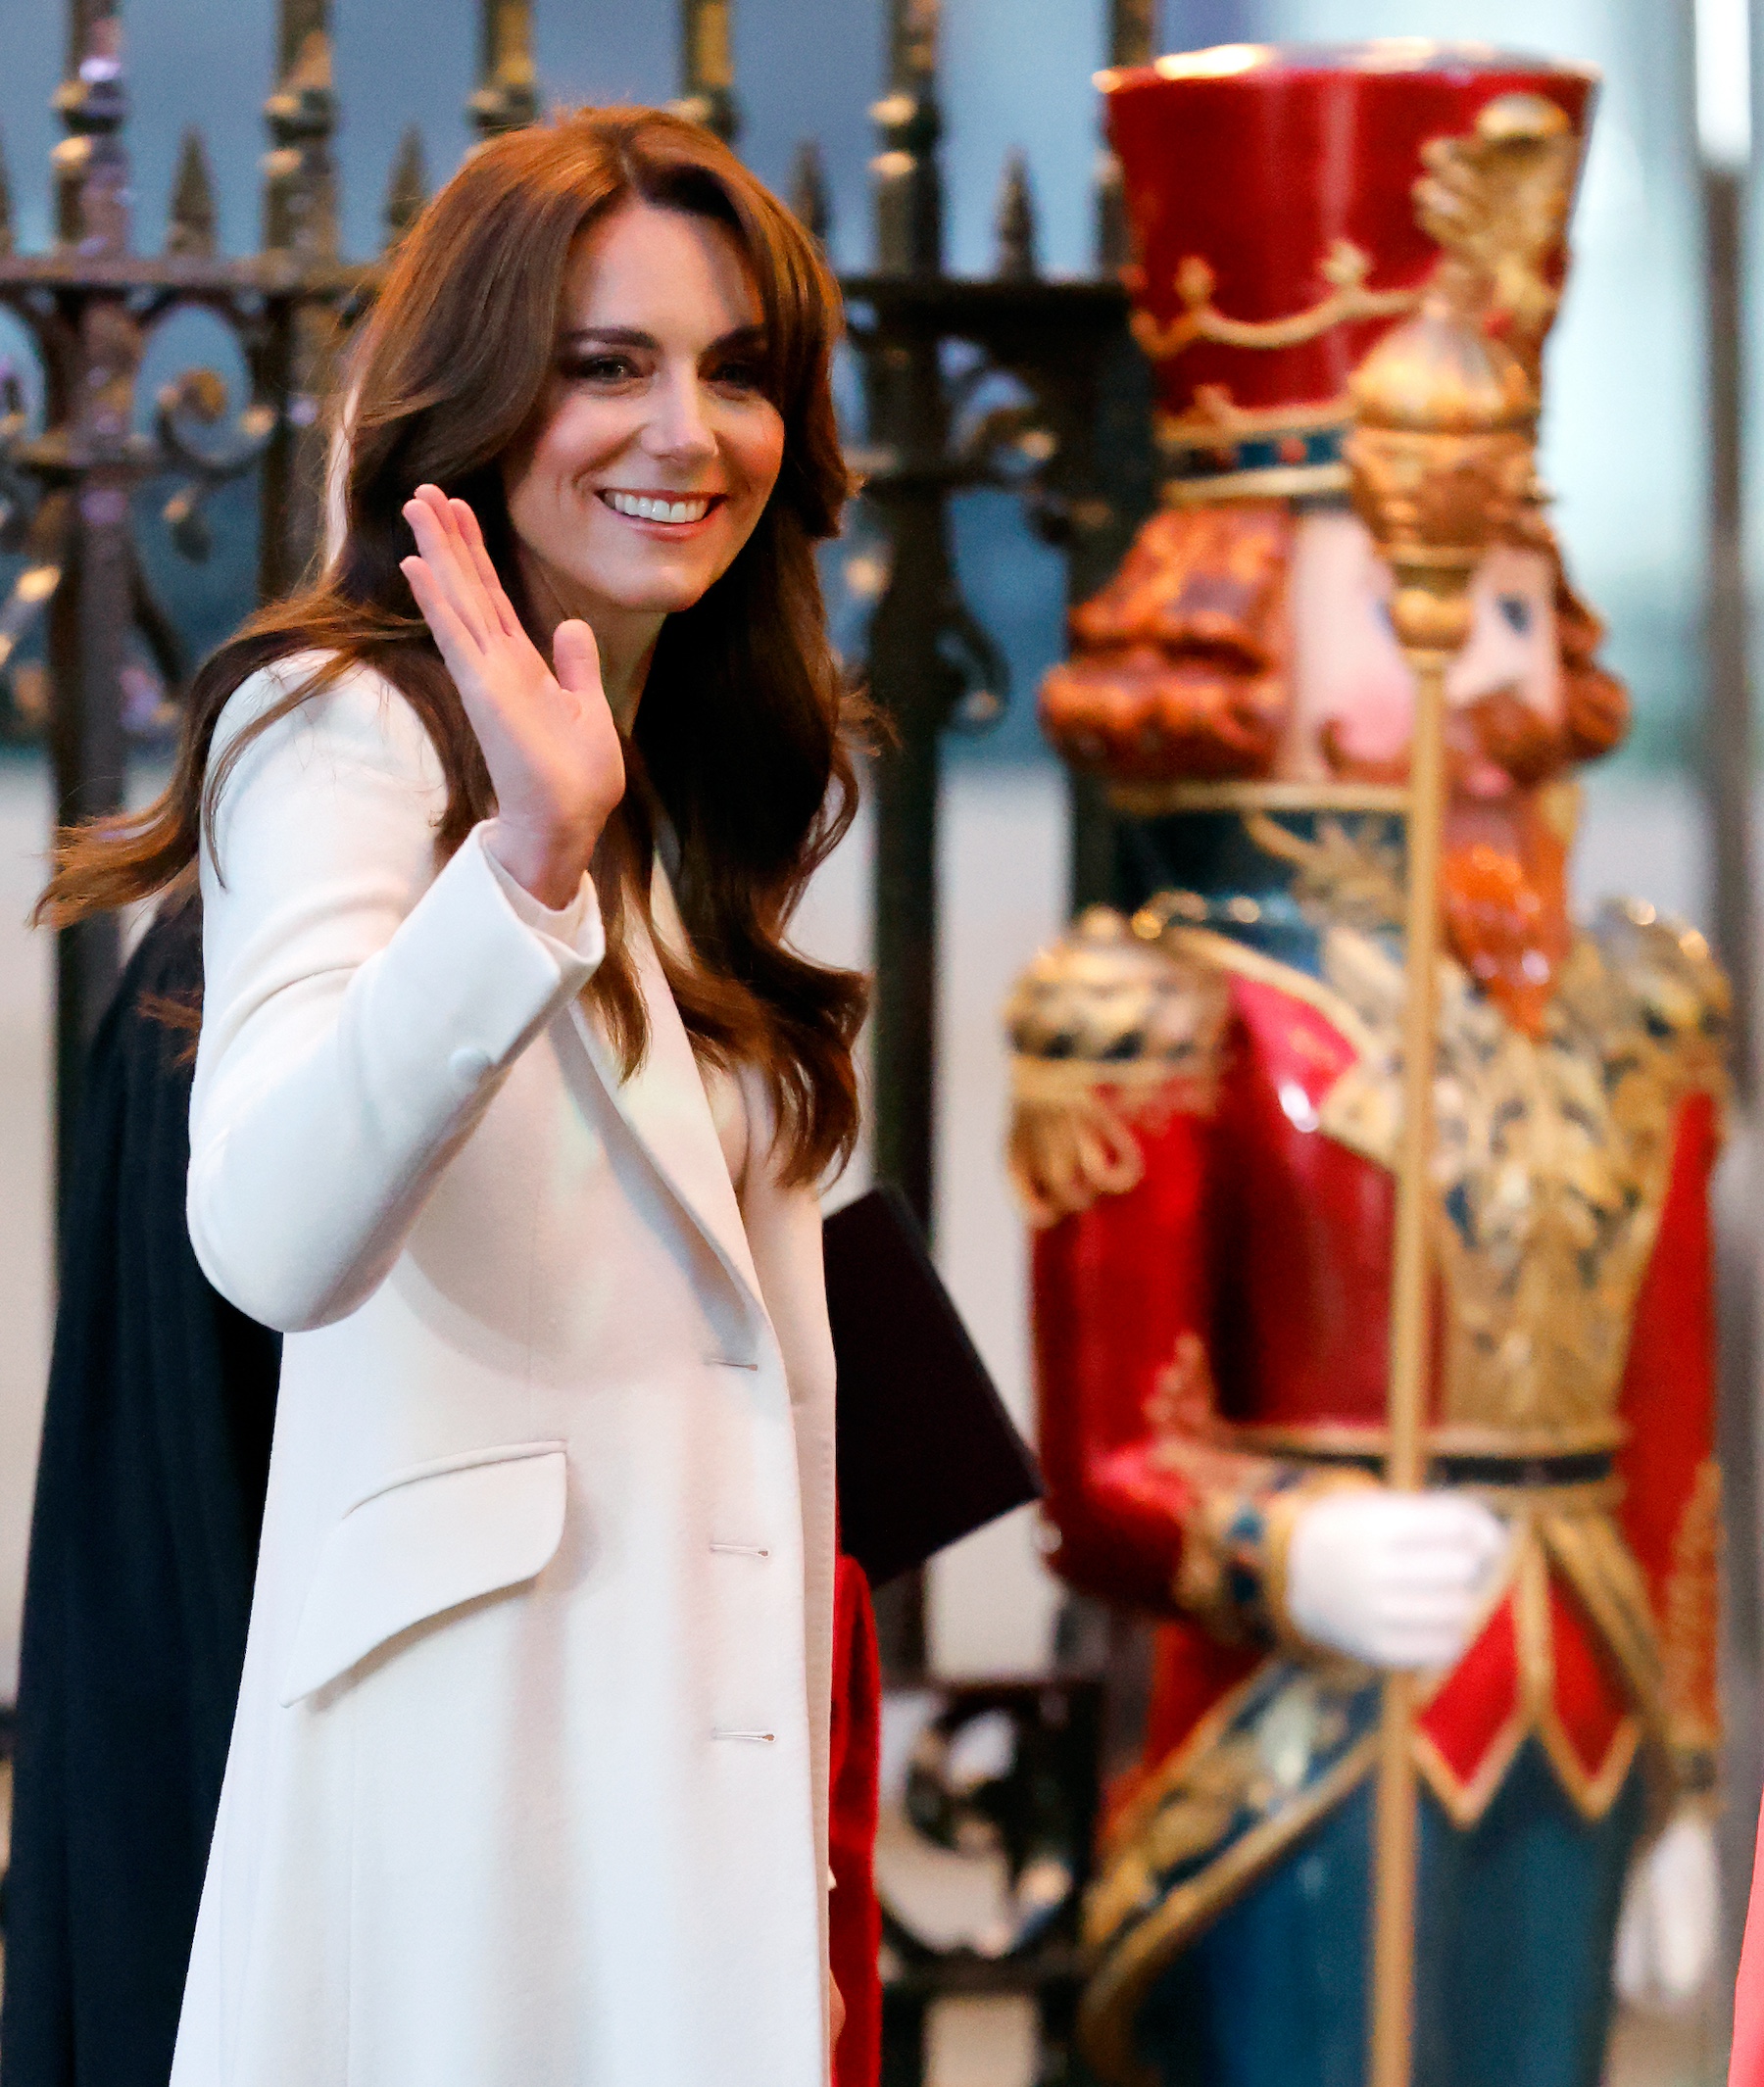 Kate Middleton Has Finally Reappeared In Public After She Mysteriously Went Missing For Months